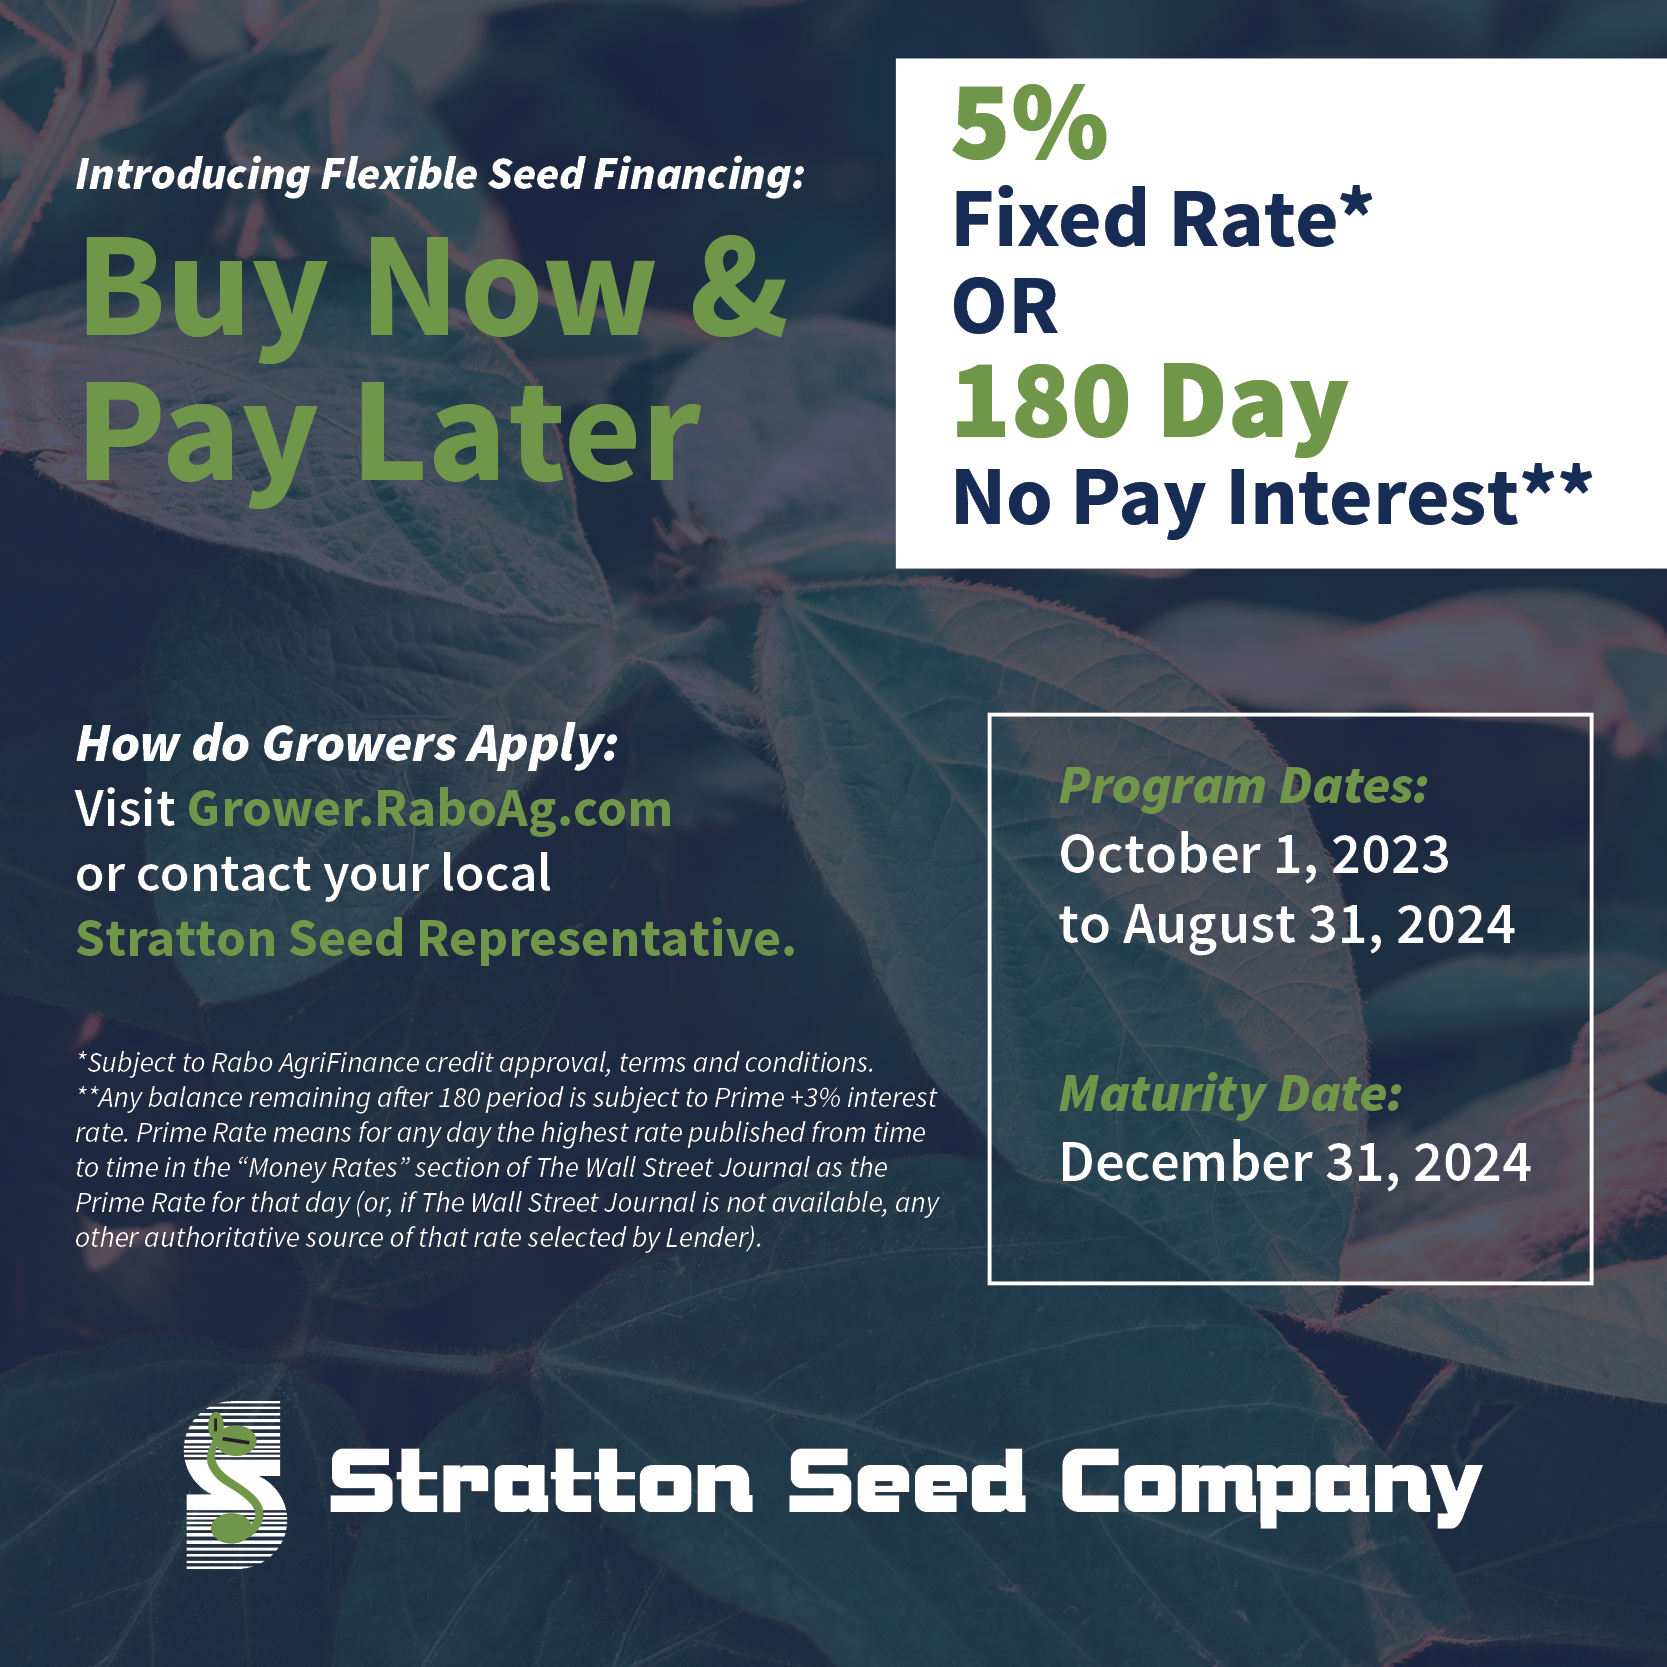 Buy Now & Pay Later – Flexible Seed Financing